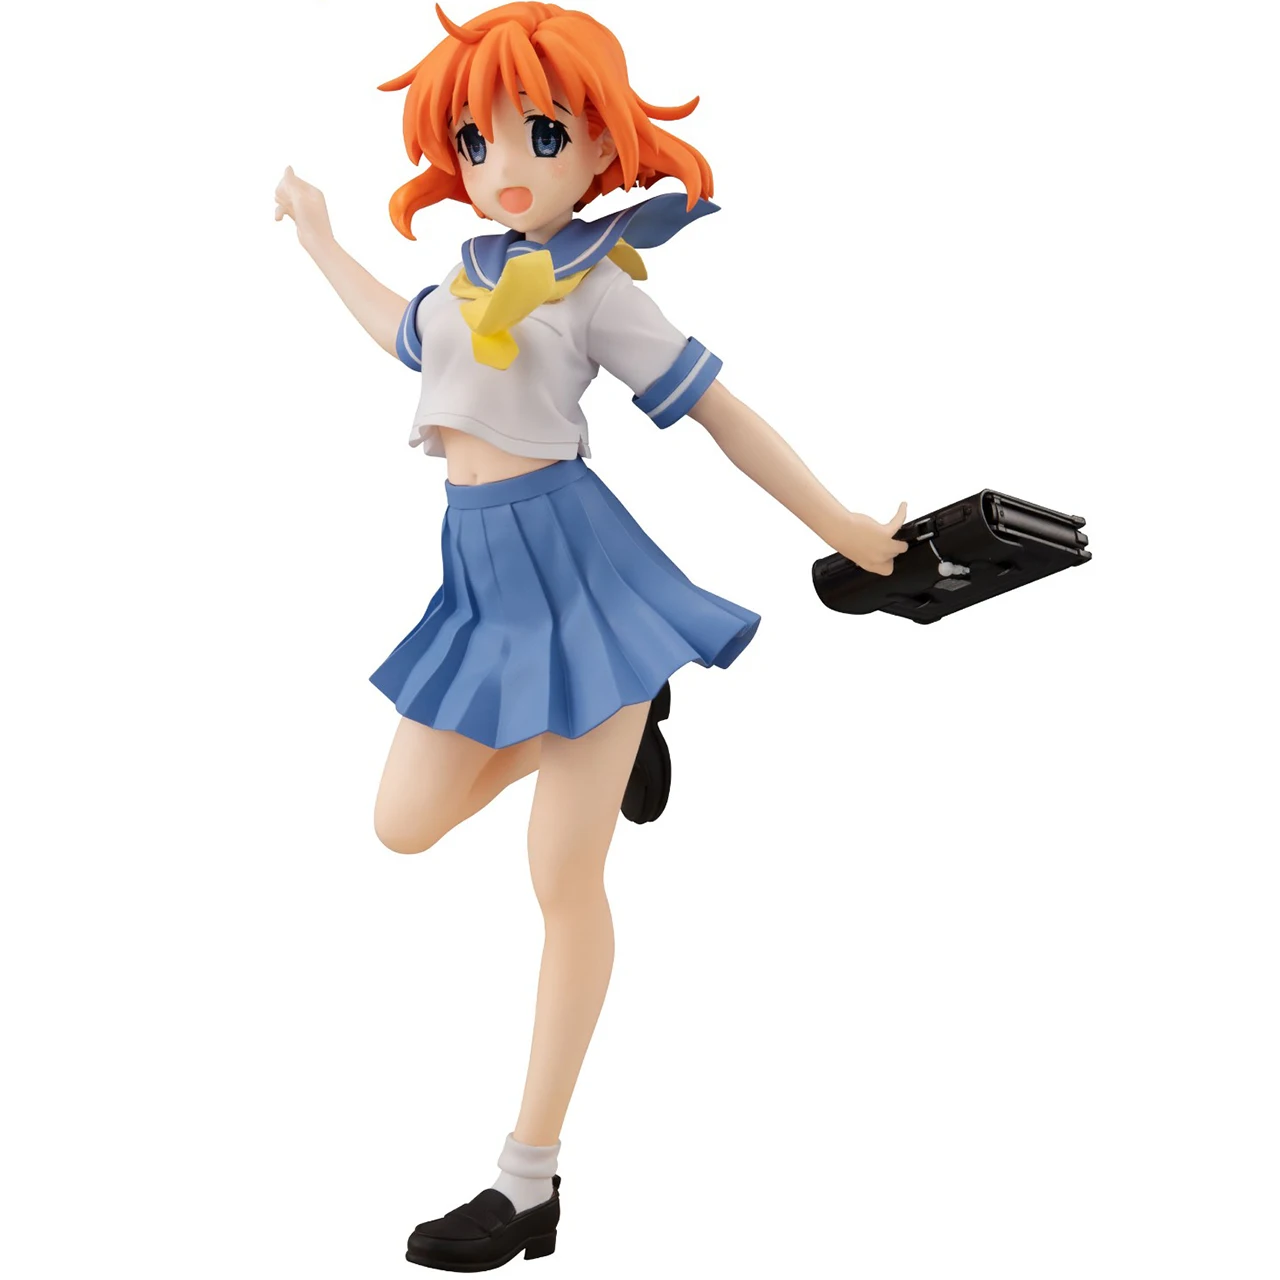 

In Stock 17Cm Higurashi When They Cry Hou Anime Figure Models Ryugu Rena Figure Figural Figurine Pvc Toys Models Collection Gift